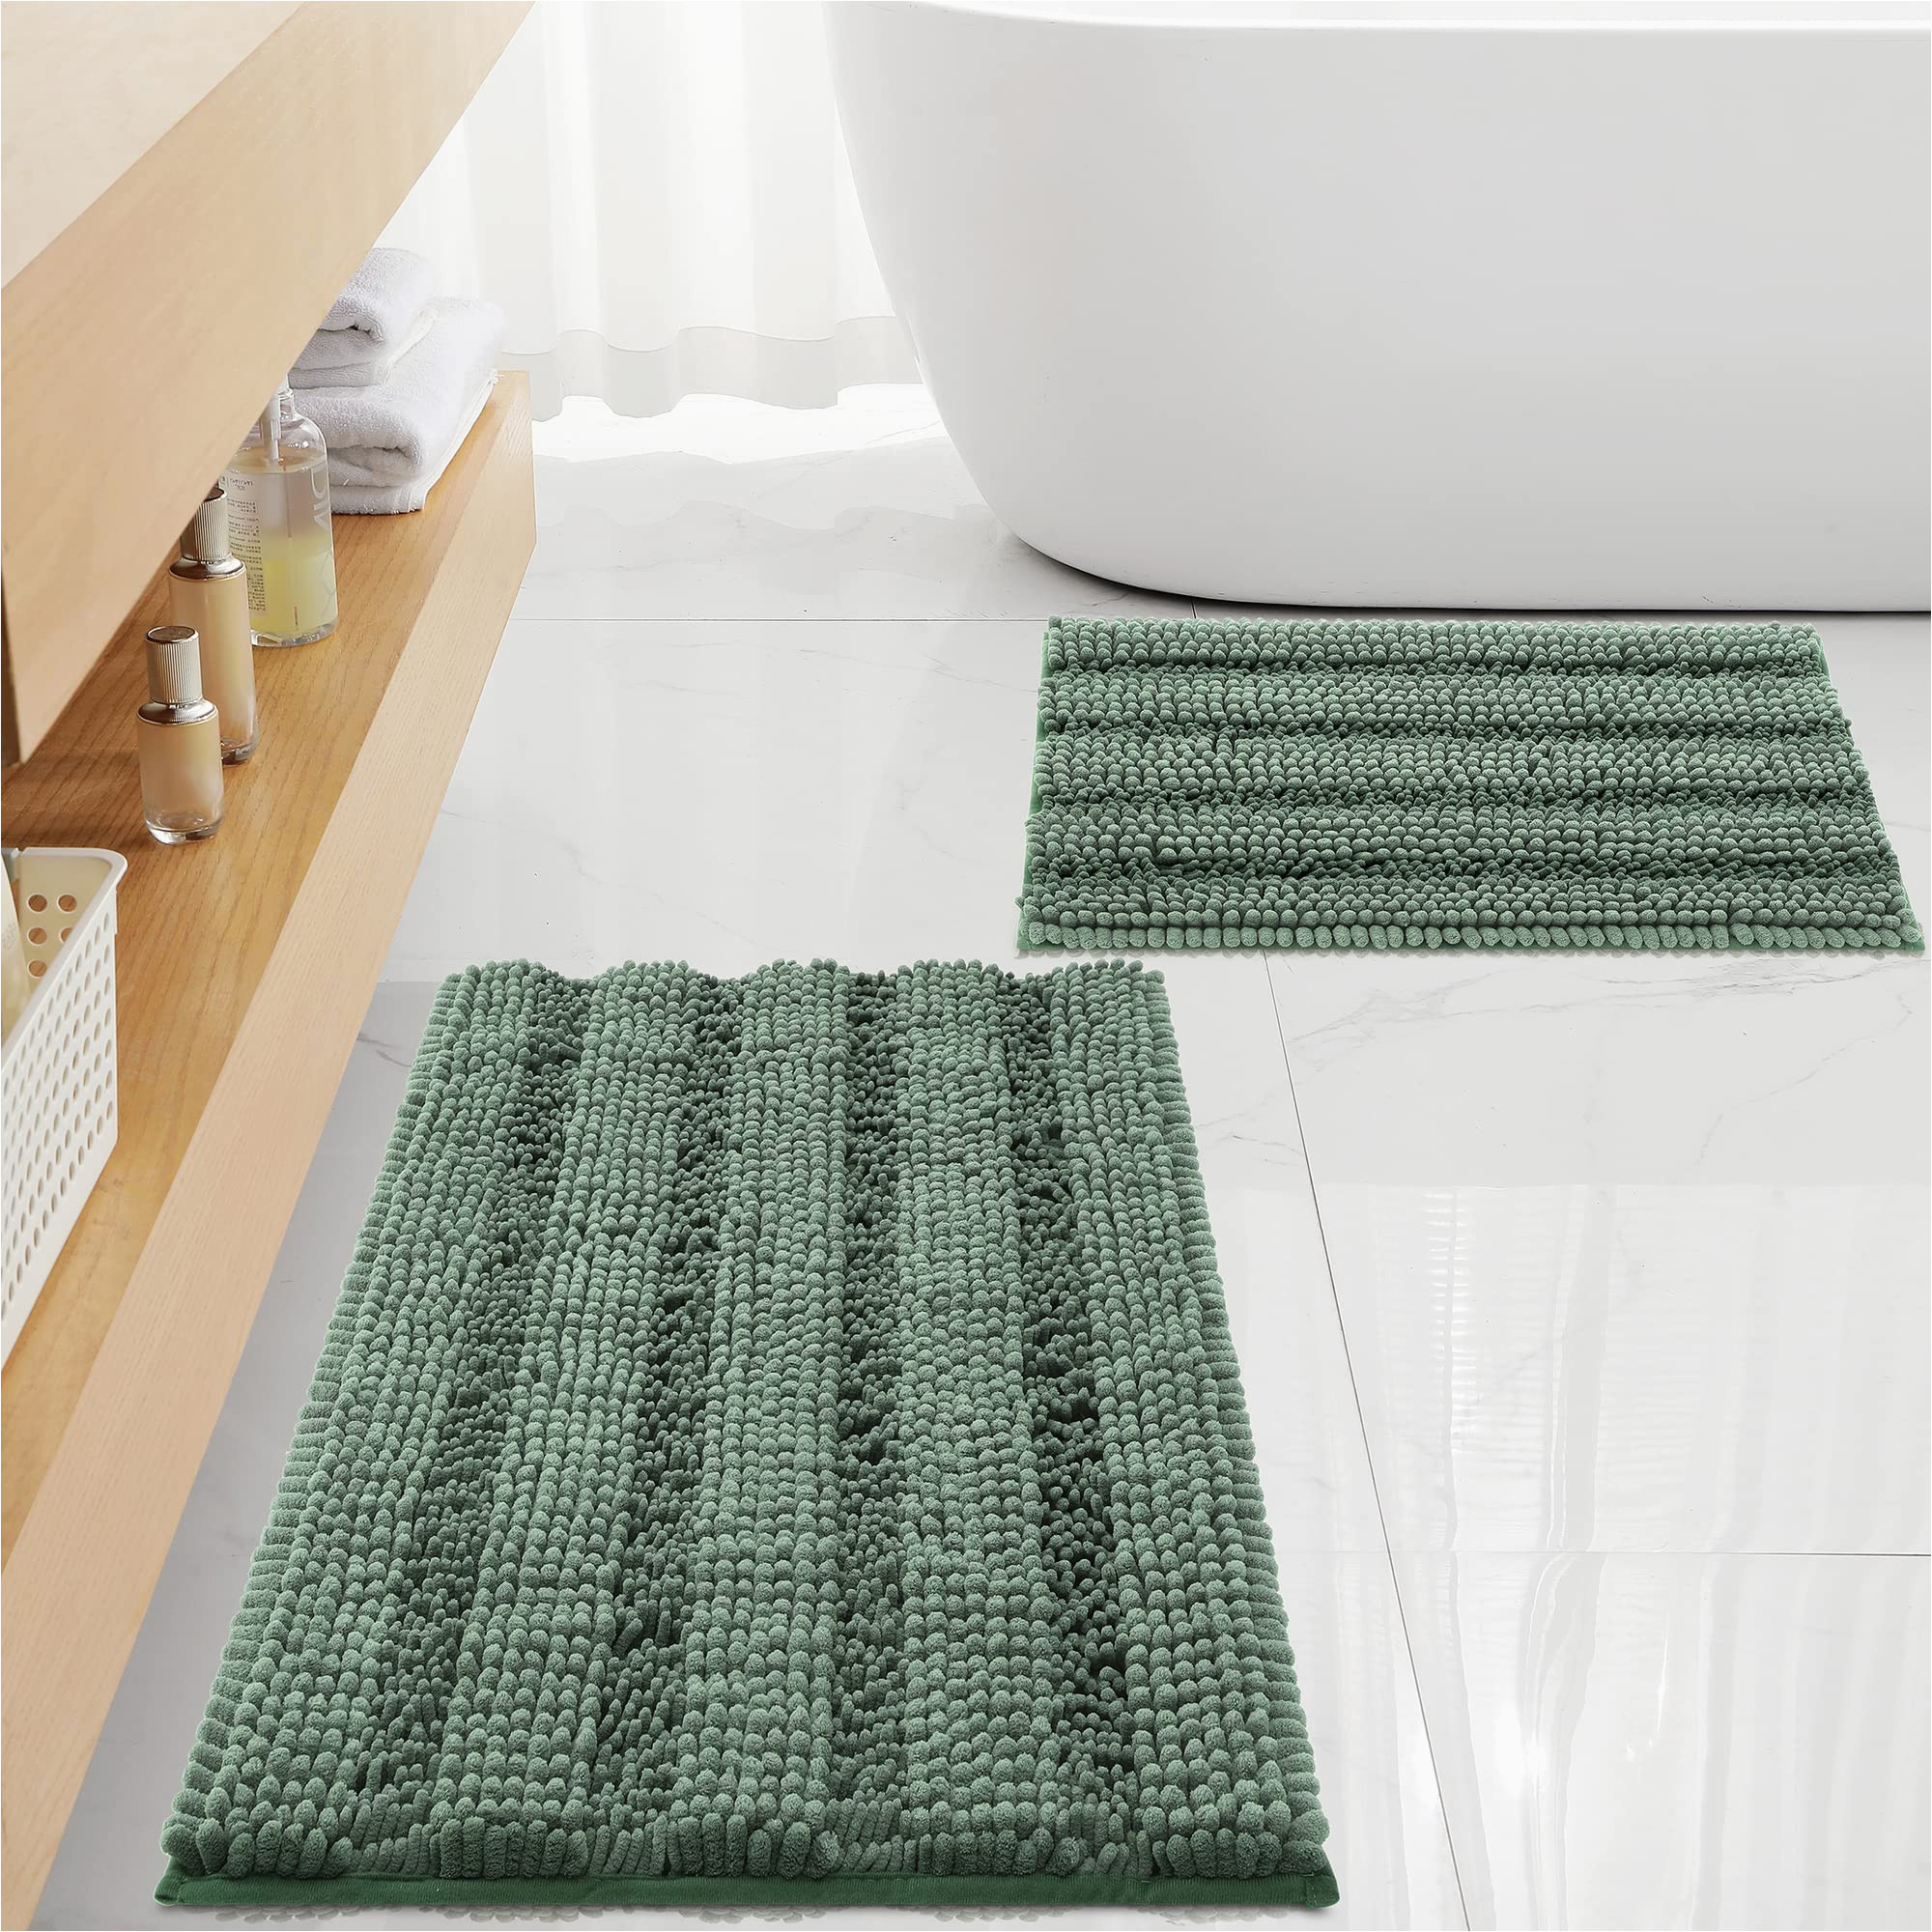 Sage Colored Bath Rugs Floleopa Non Slip Thick Shaggy Chenille Sage Green Bathroom Rug Sets 2 Piece, Thickened Hot Melt Rubber Bottom Bath Mats for Bathroom, Bath Rugs Quick …